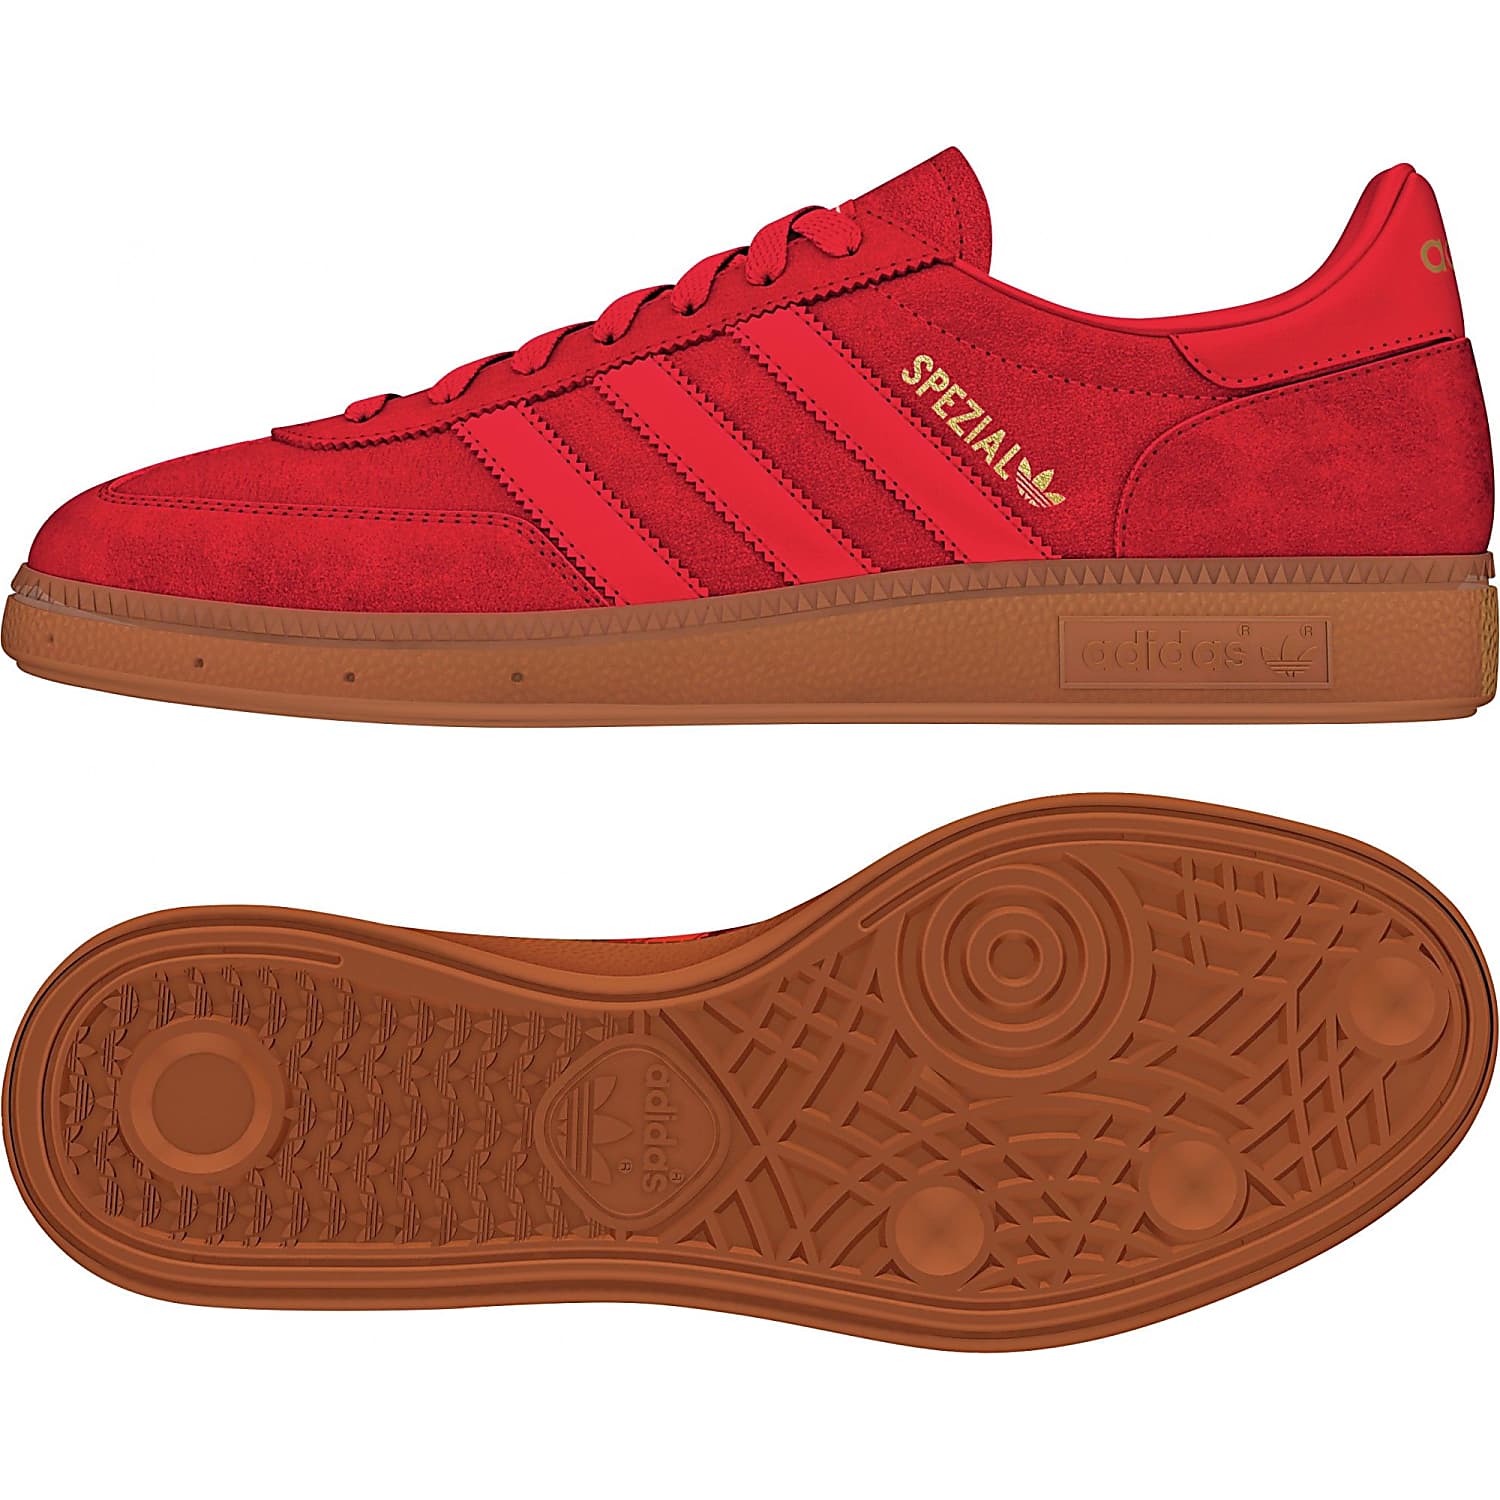 adidas SPEZIAL, Red - Red - Gum - Free Shipping starts at 60£ -  www.exxpozed.eu